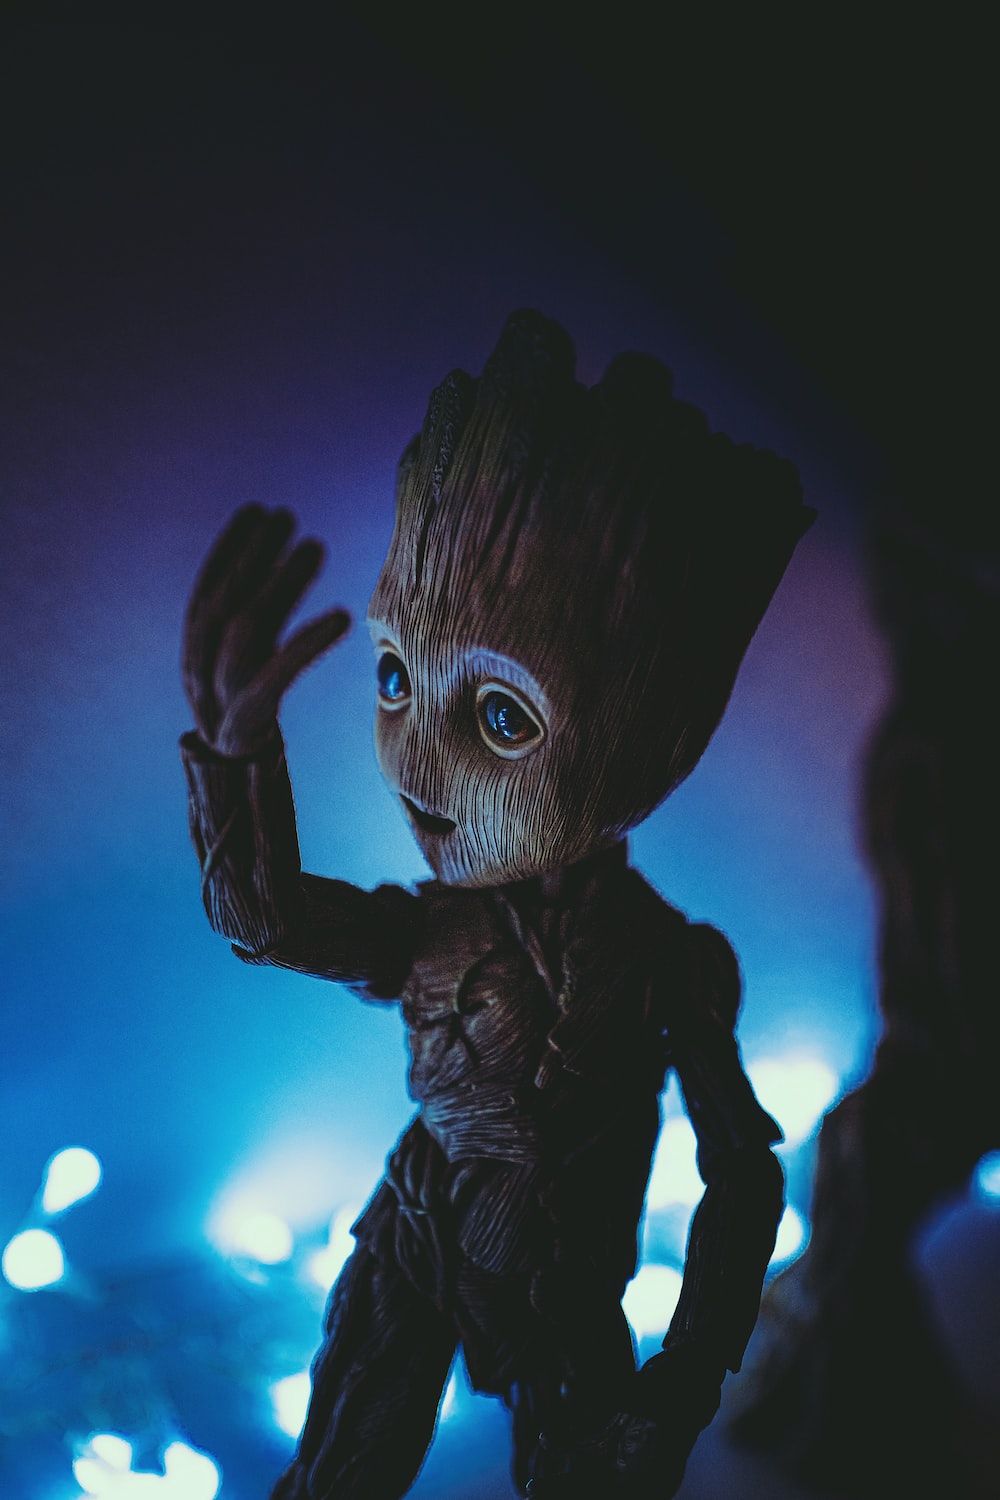 A Guardians of the Galaxy toy of Groot in a blue and black background - Avengers